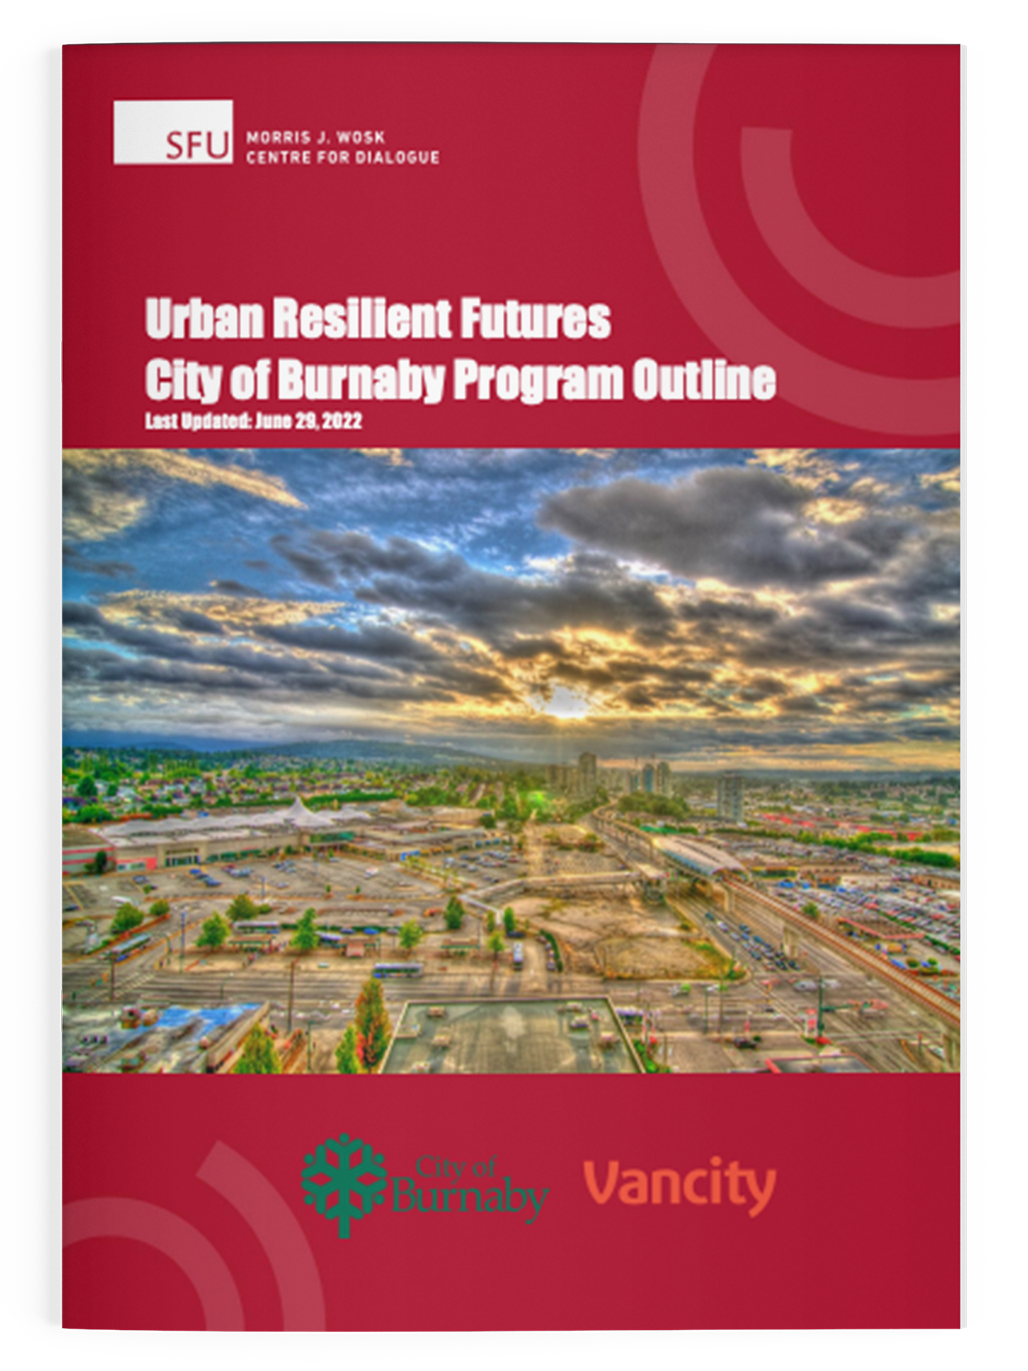 Mockup of the cover of the Urban Resilient Futures program outline